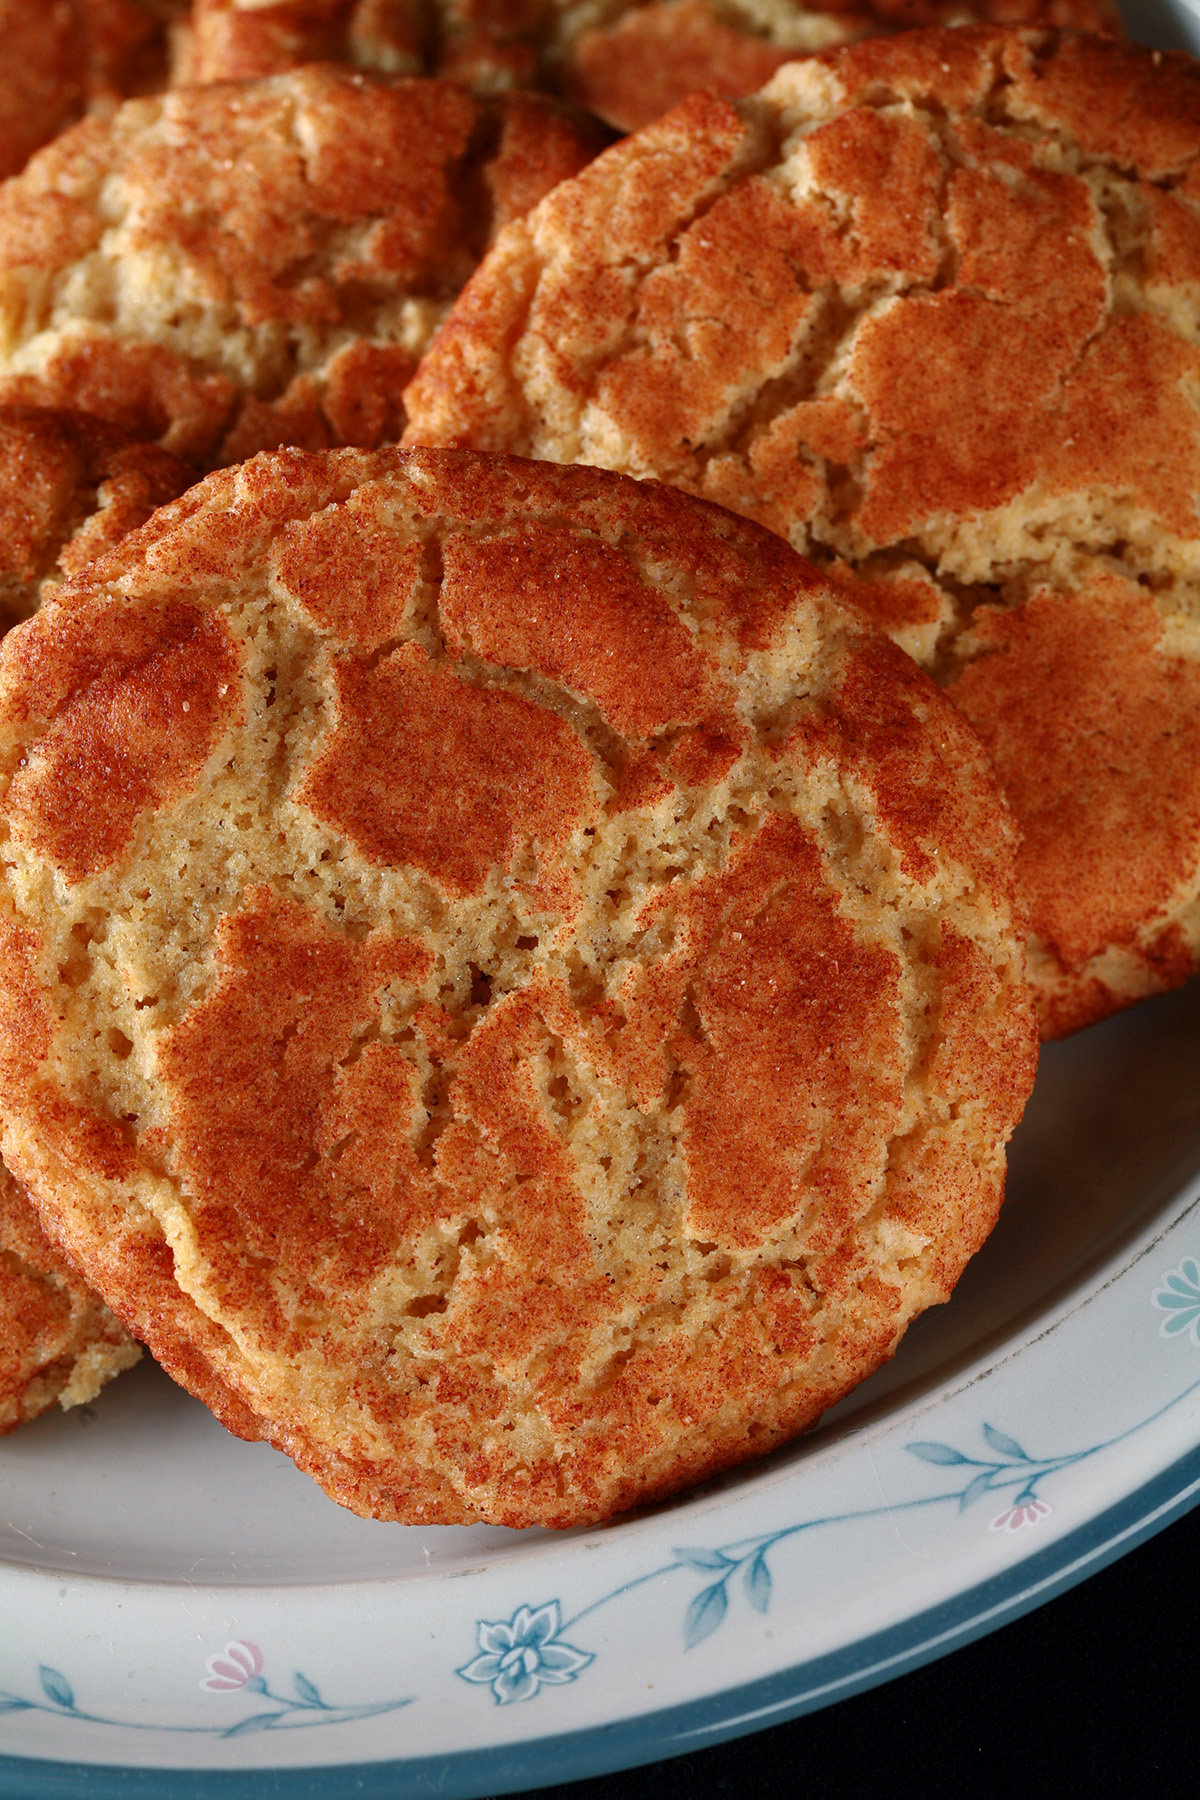 A plate of gluten free snickerdoodles.